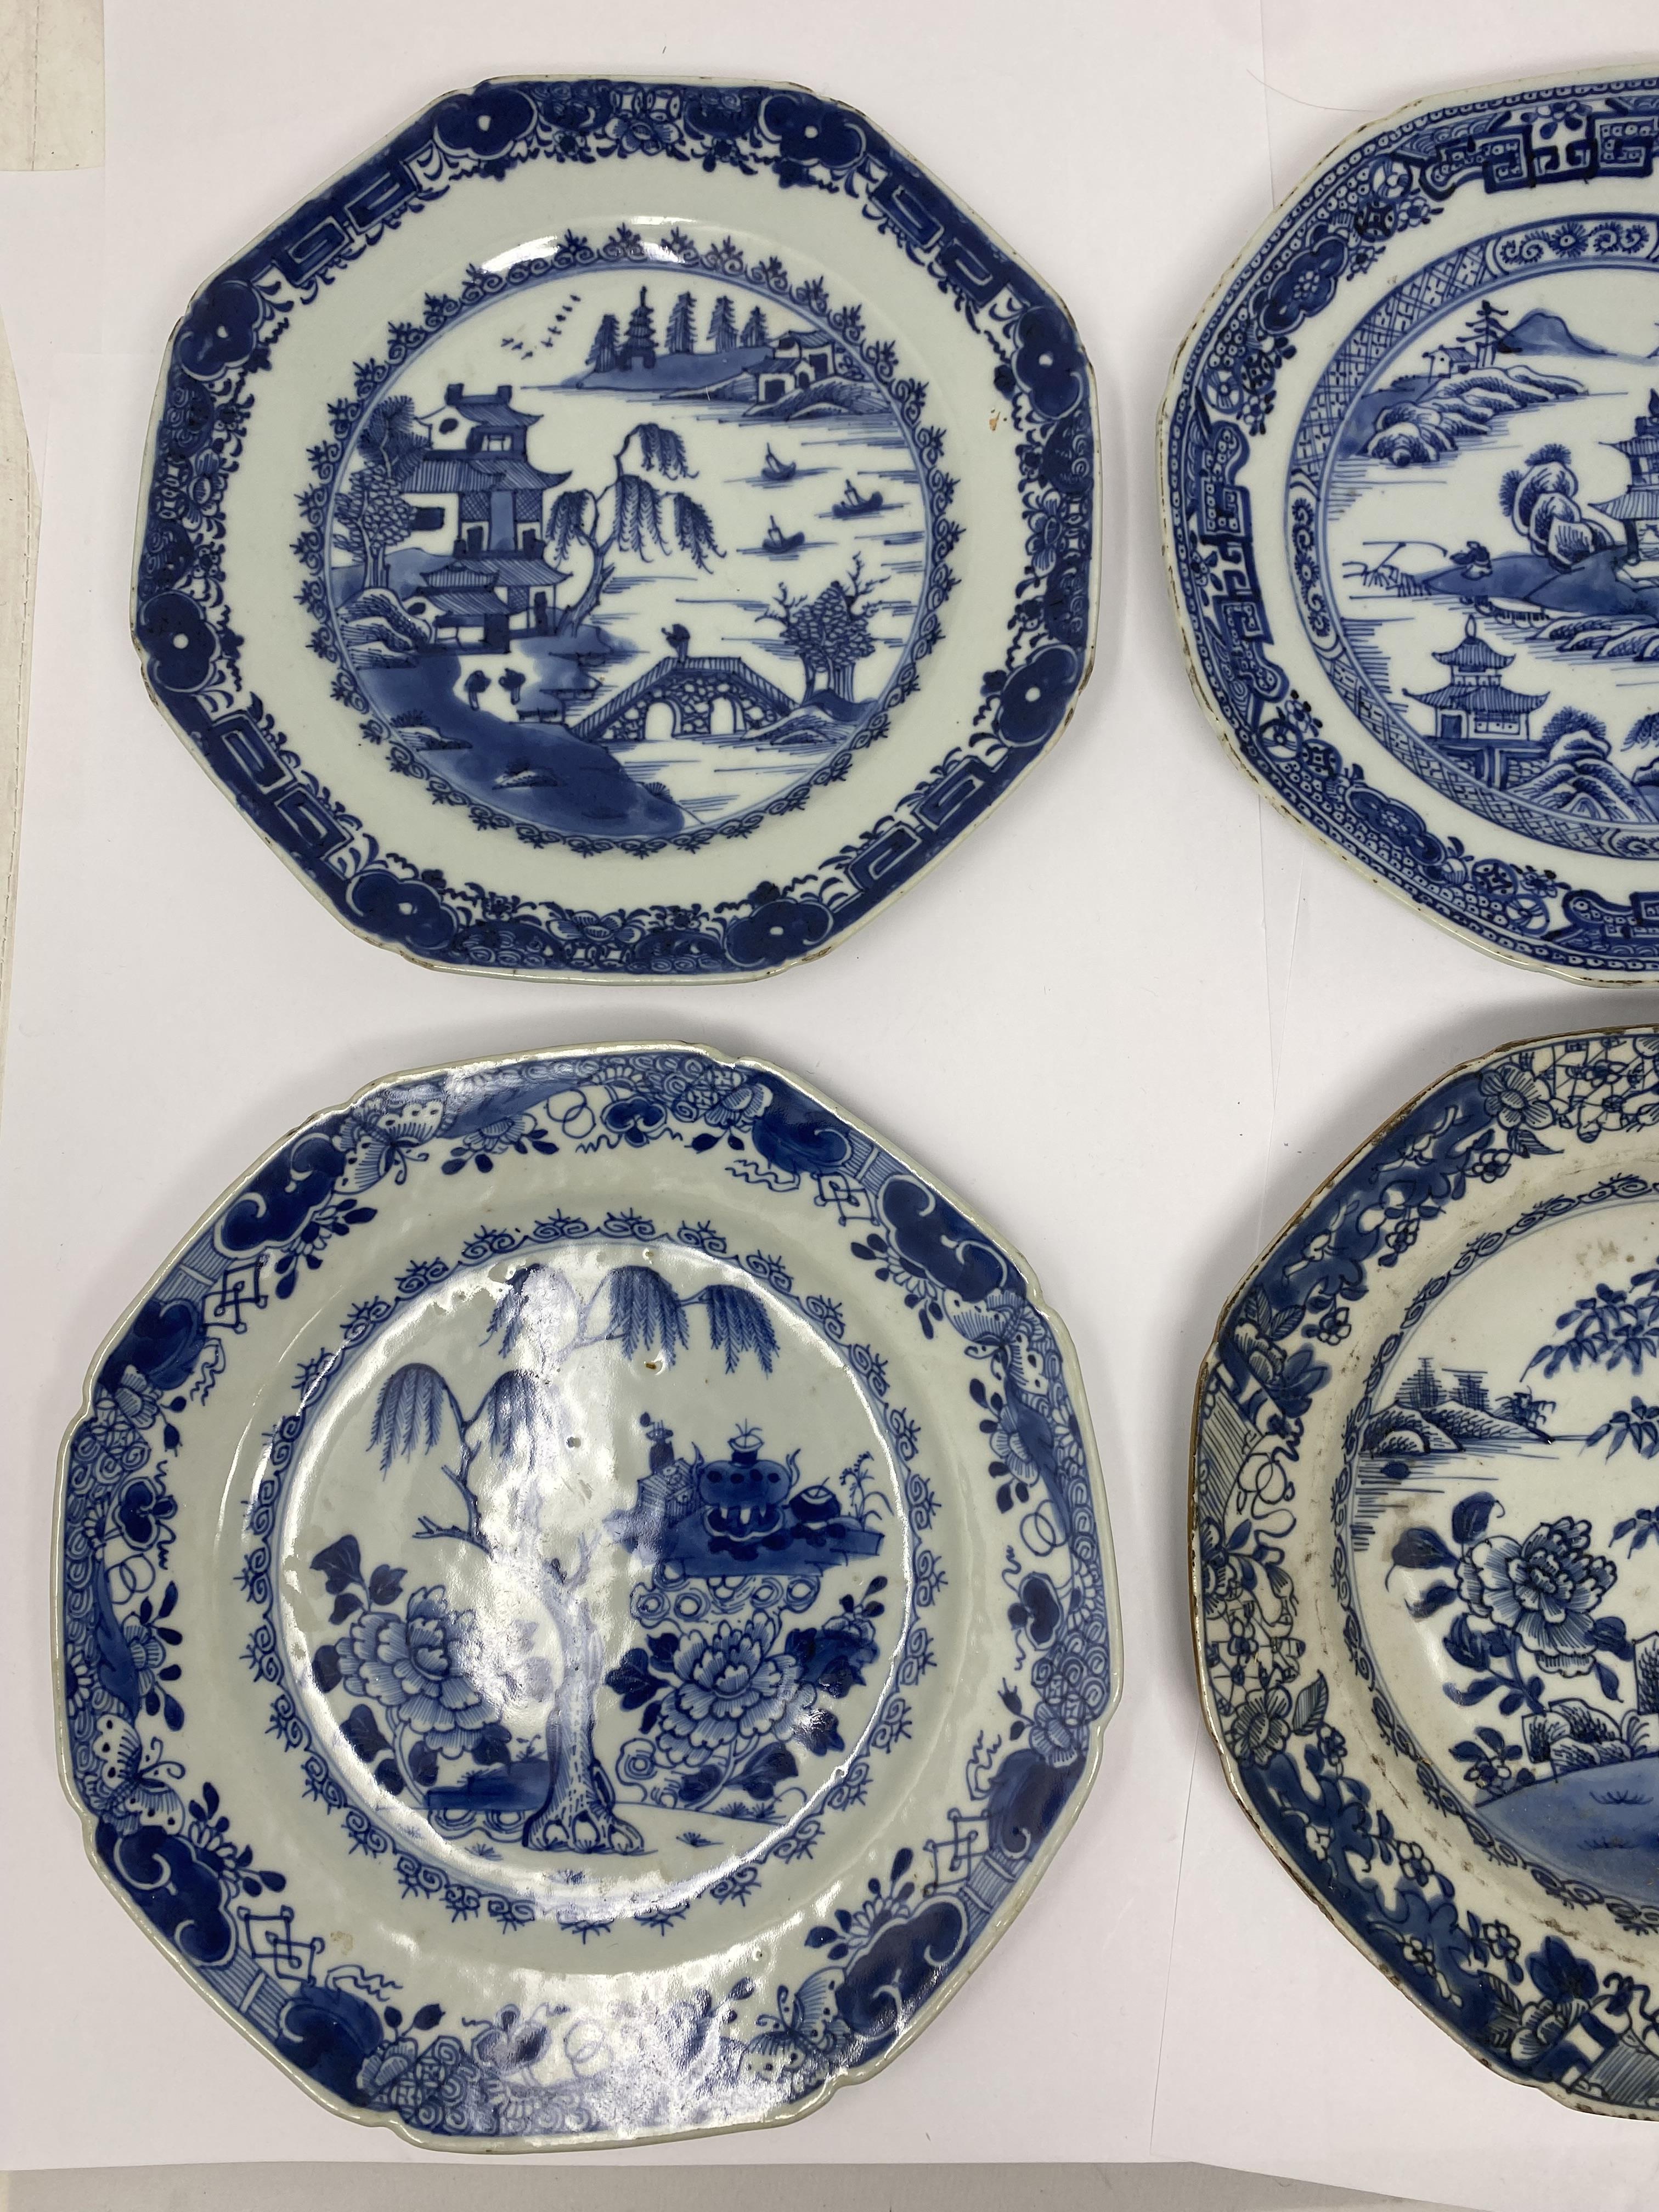 TEN CHINESE EXPORT BLUE AND WHITE DINNER PLATES, 18TH CENTURY - Image 7 of 11